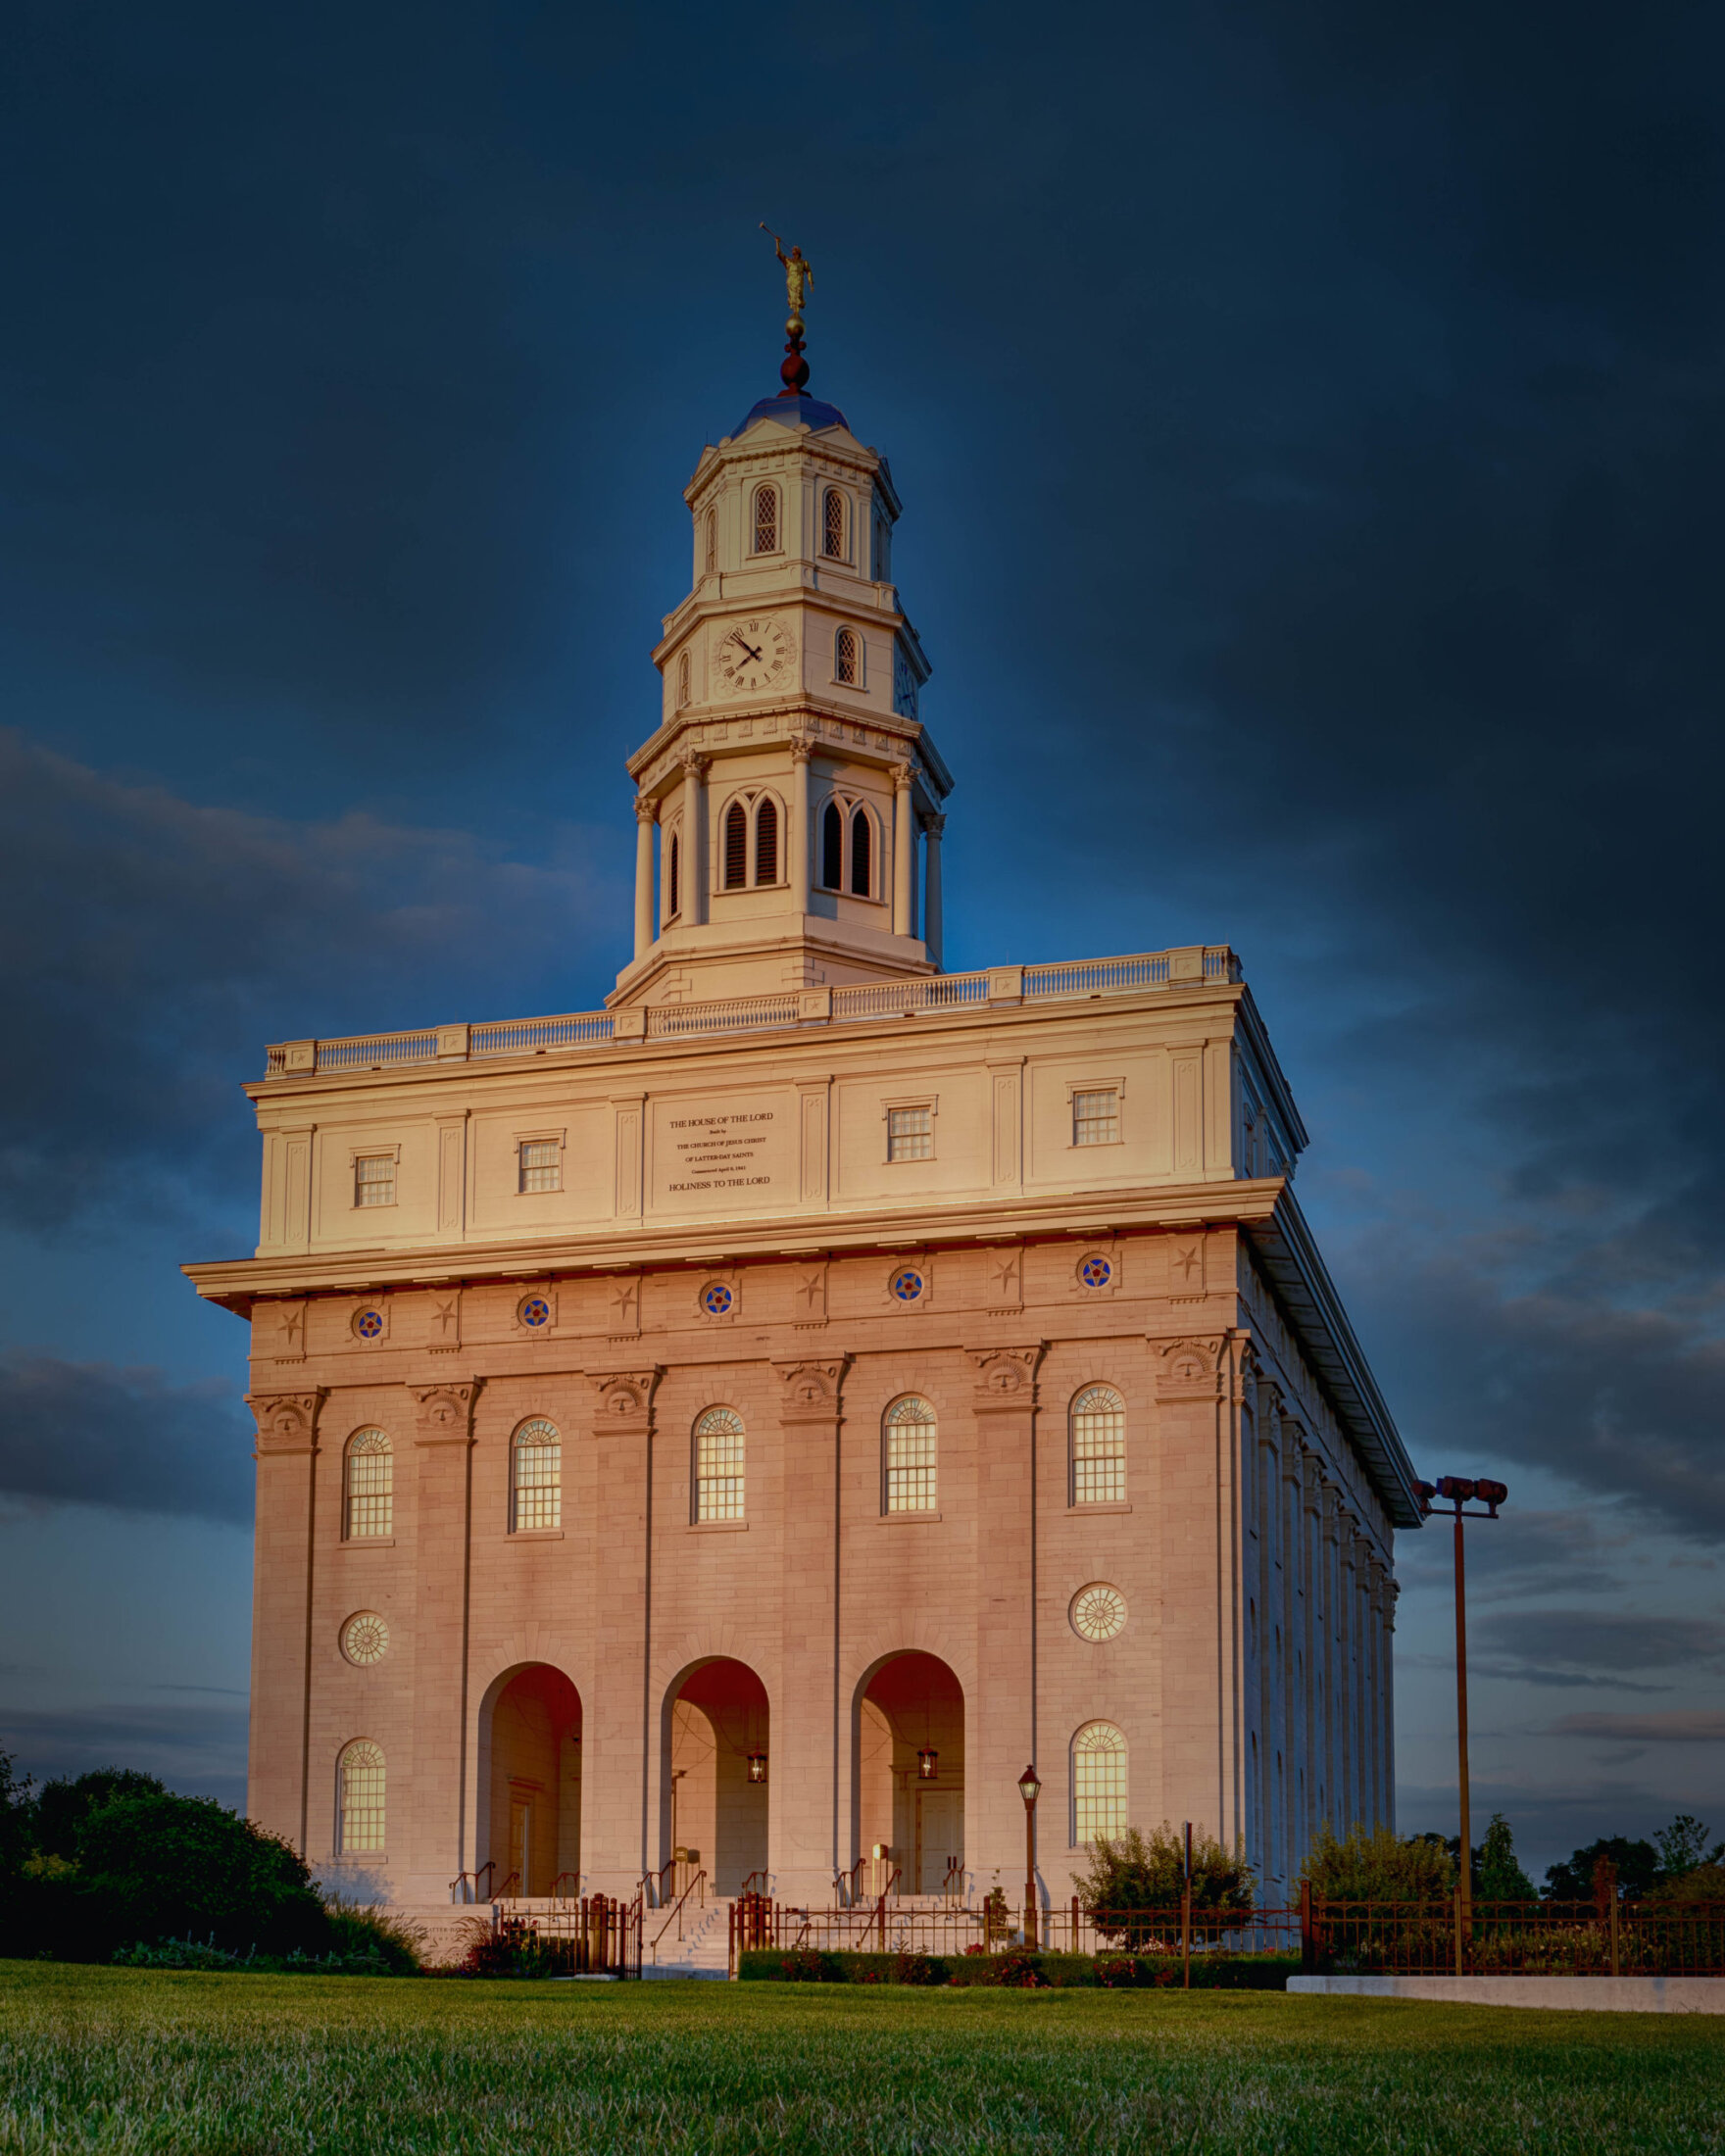 Blue Hour at the Nauvoo Temple